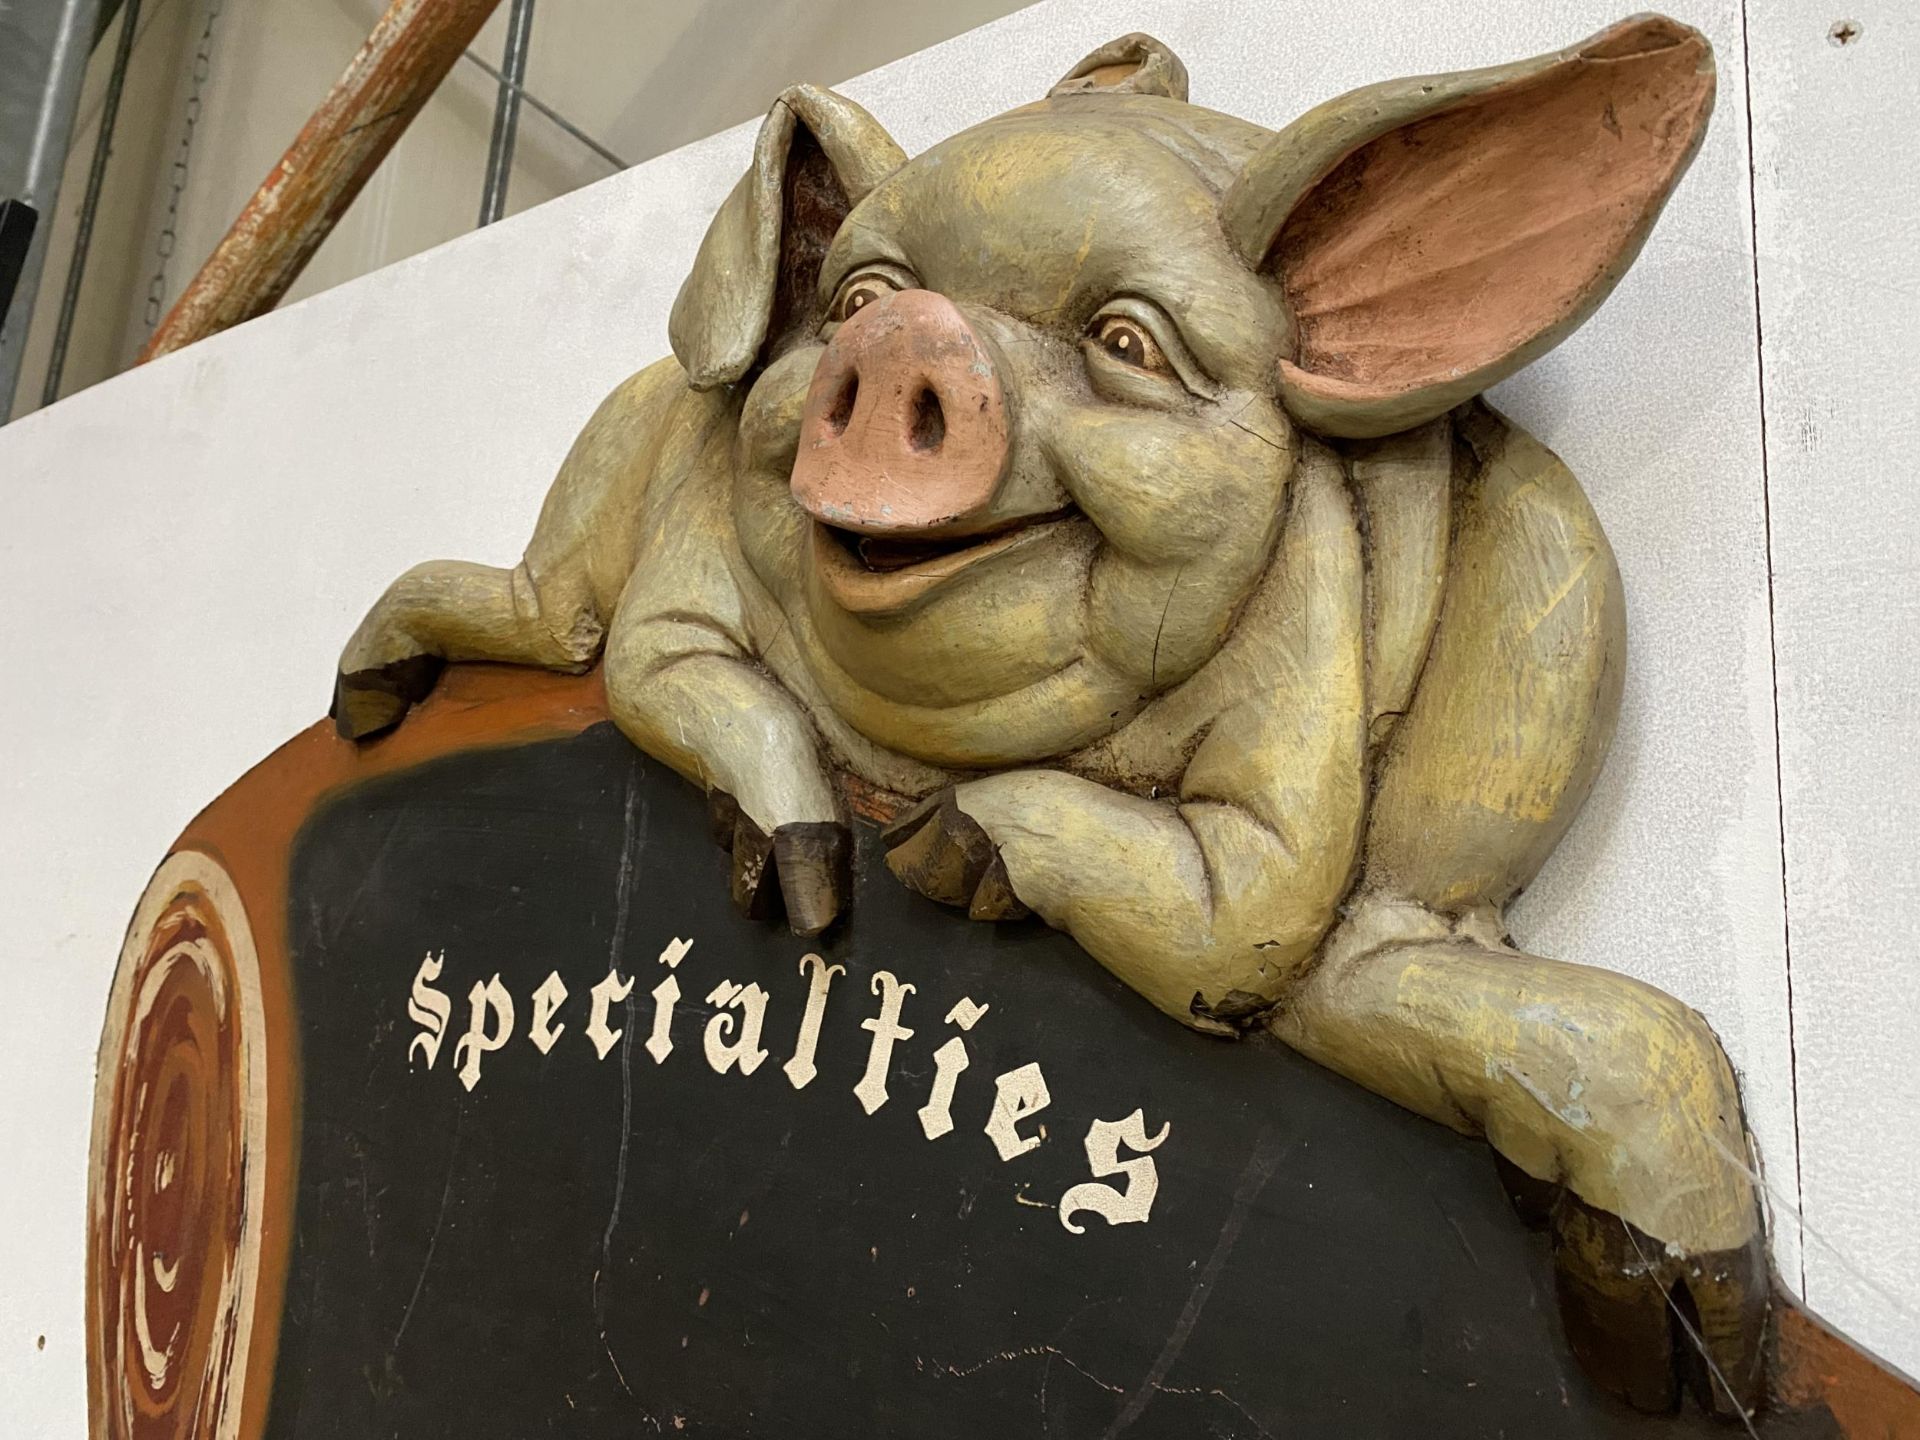 A RESTAURANT CHALK BOARD 'SPECIALITIES' DECORATED WITH SMILING PIG - Image 2 of 4